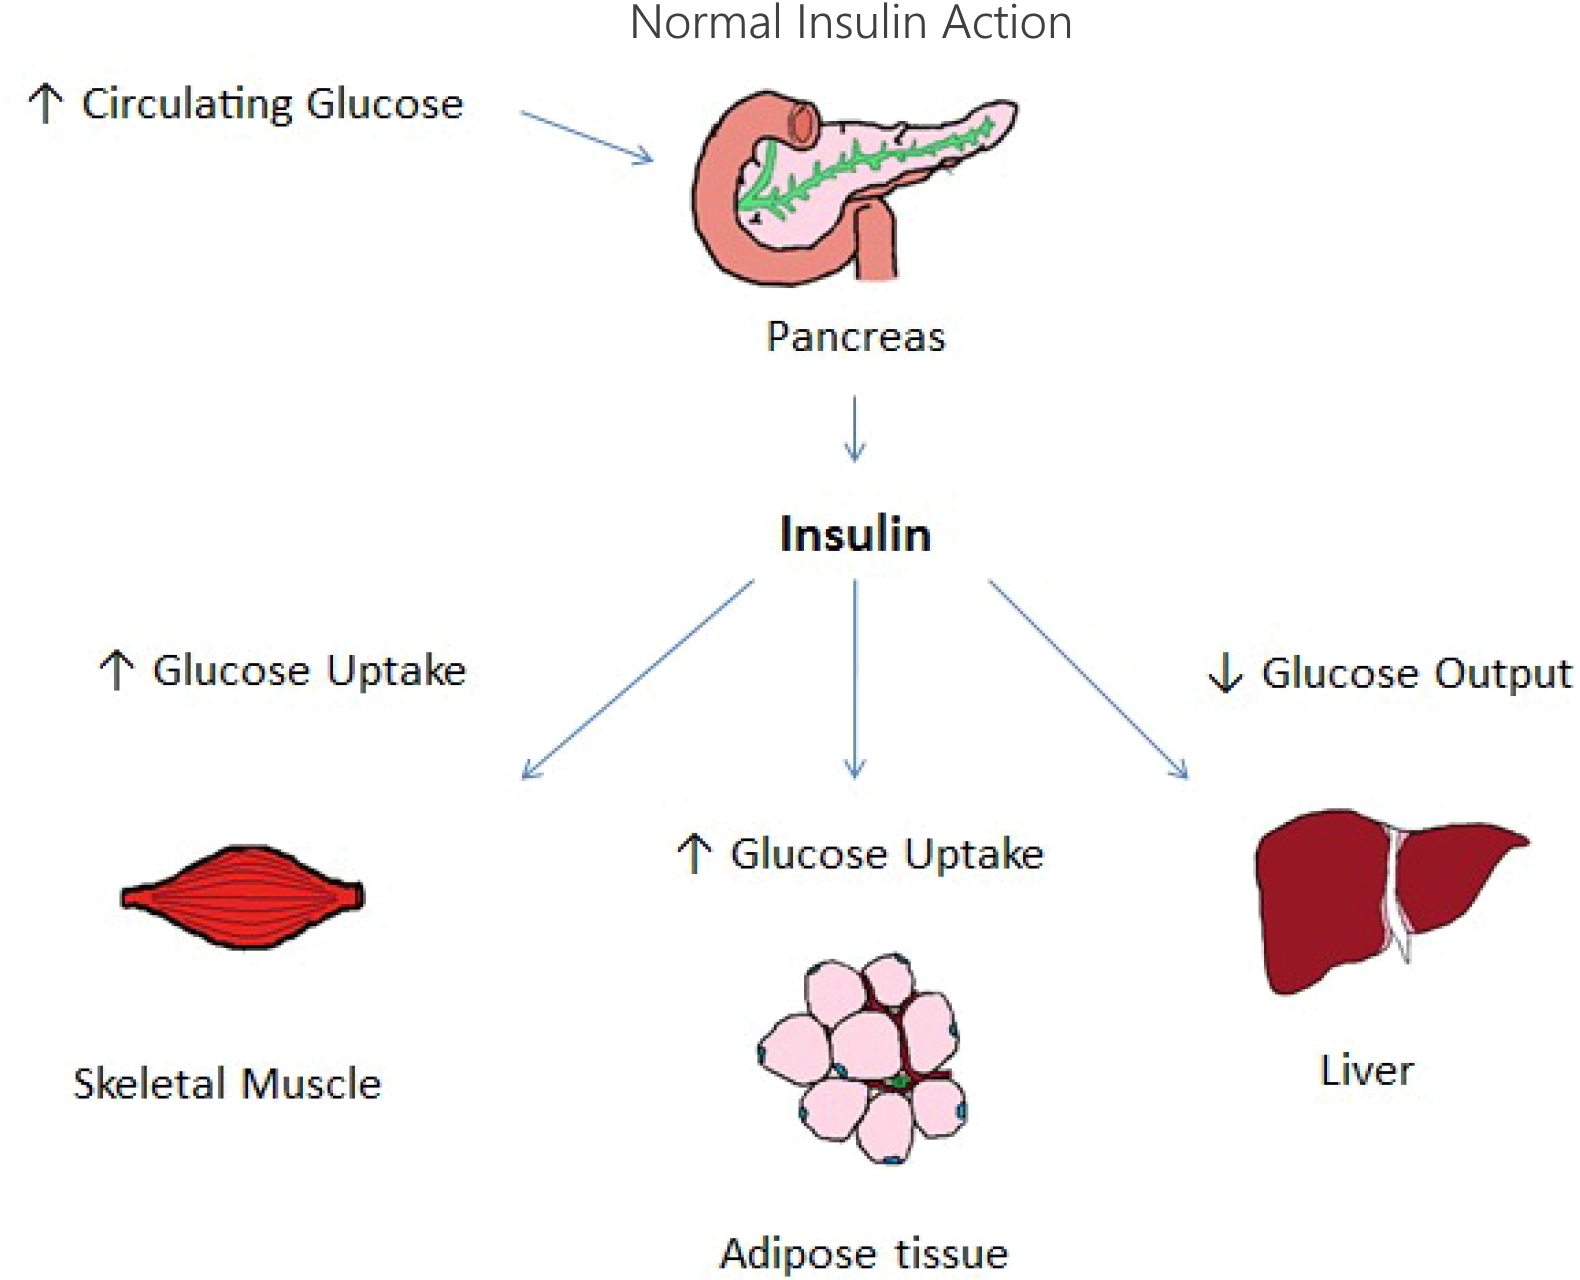 Normal insulin action.